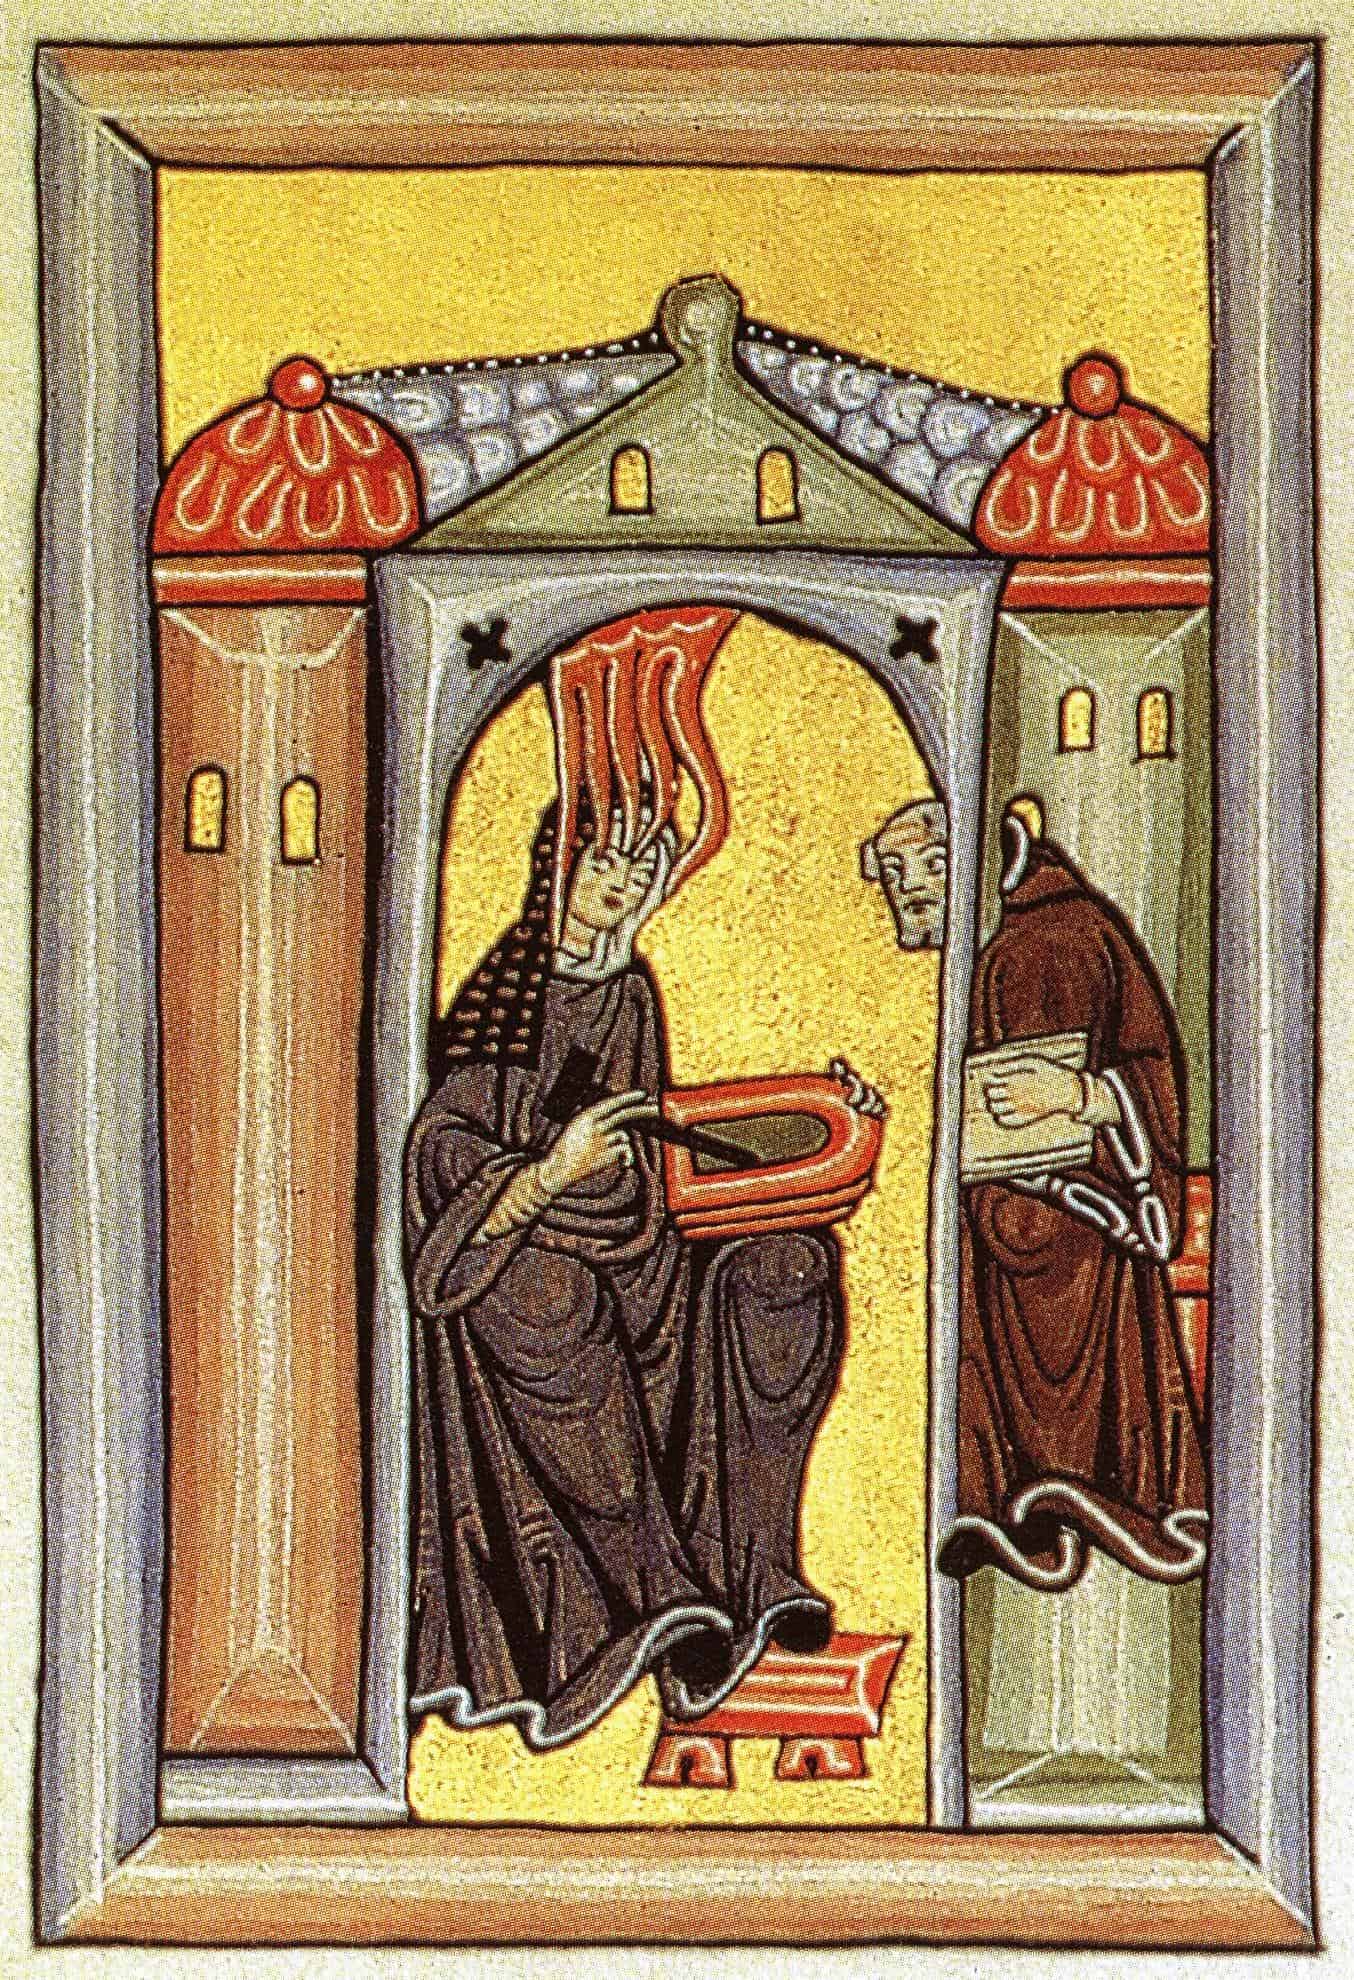 A medieval nun dictates her visions to a monk in this image from the Rupertsberg Codex of Liber Scivias provided by Wikimedia